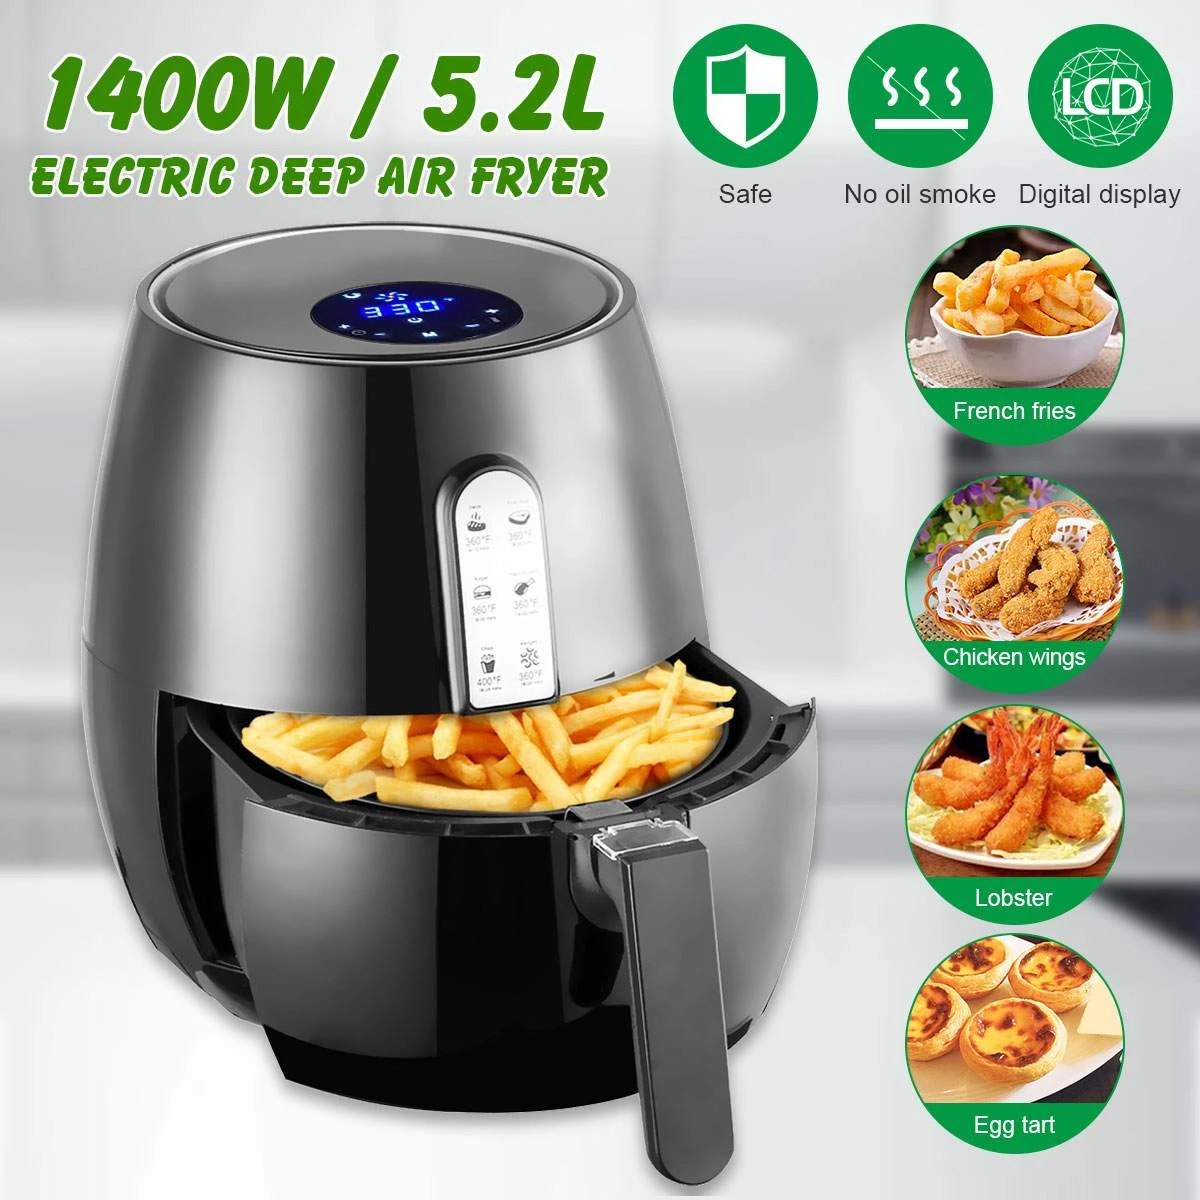 Me Stoutmoedig Pa 1400W High Power Lucht Friteuse Zonder Olie Elektrische Airfryer 5.2L  Friteuse Touch Screen Led Digitale Keuken Accessoires Air friteuse|Airfryers|  - AliExpress